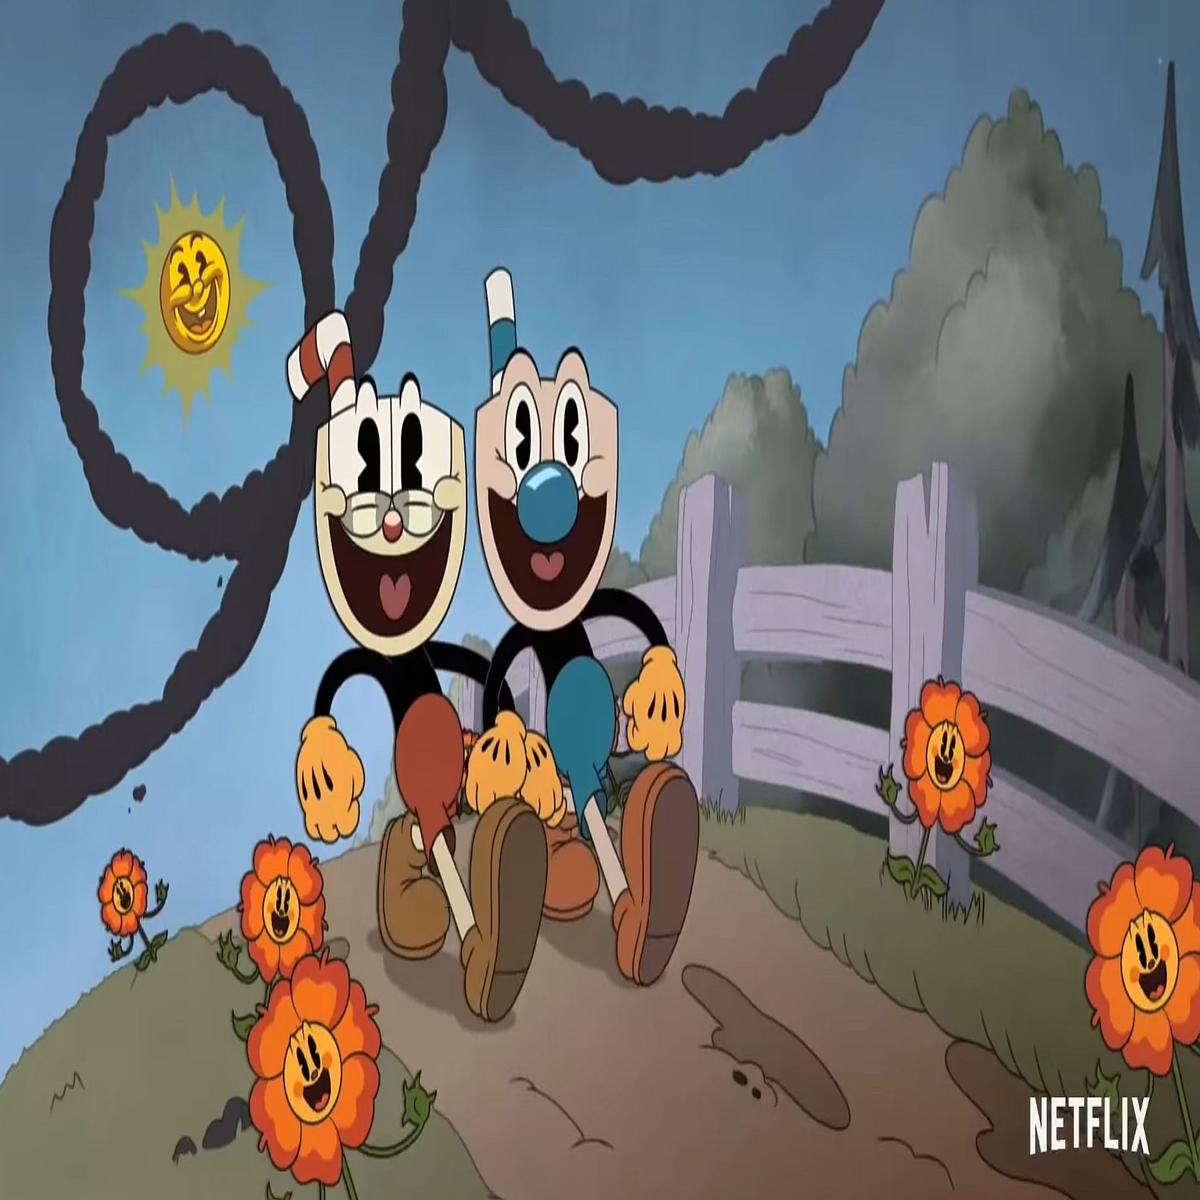 Speedrunning Cuphead while climbing a mountain is the peak of entertainment